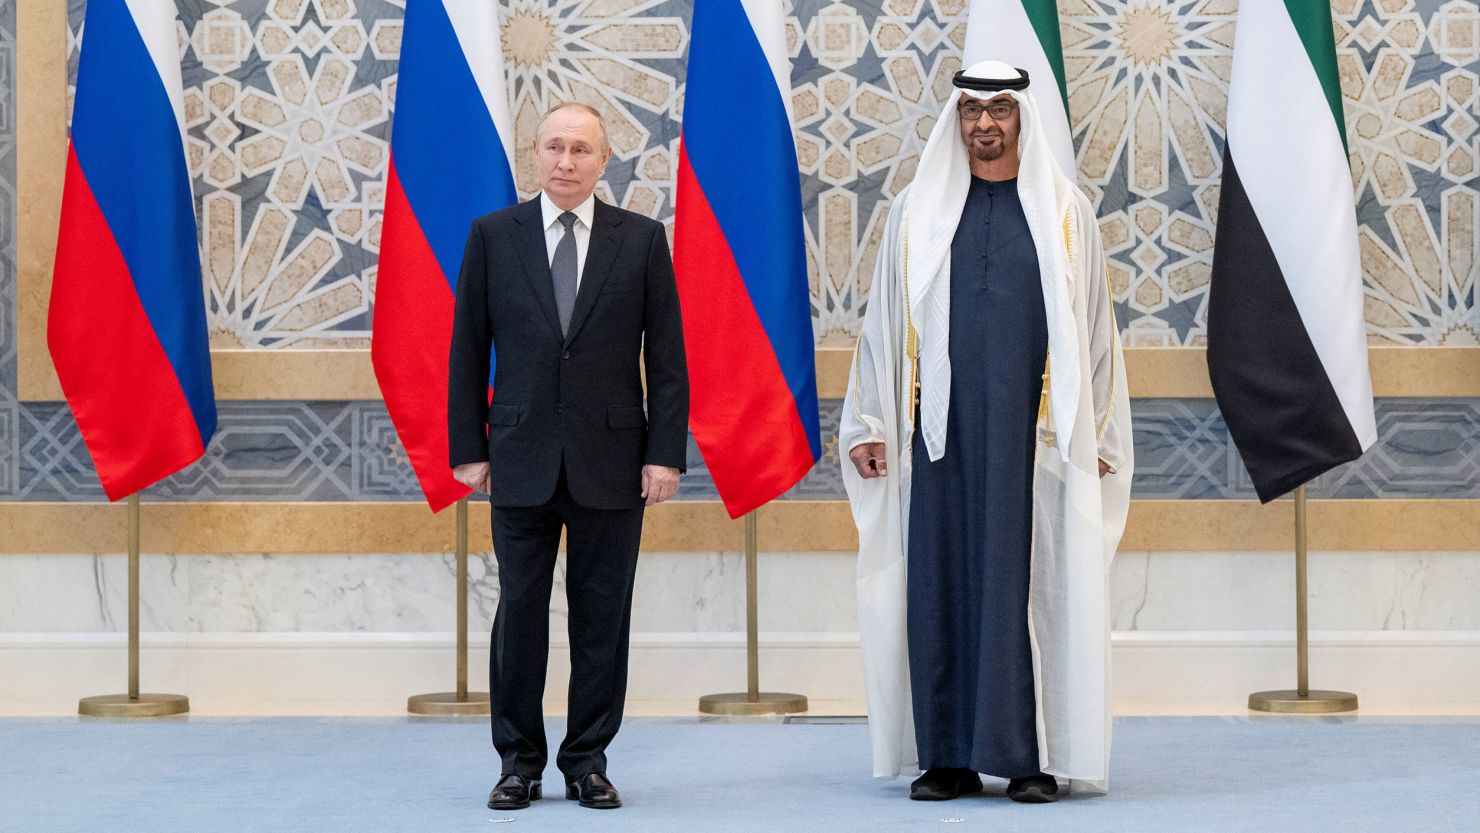 Sheikh Mohamed bin Zayed Al Nahyan, President of the United Arab Emirates and Vladimir Putin, President of Russia, stand for a photograph during a state visit reception, at Qasr Al Watan, Abu Dhabi, United Arab Emirates, December 6, 2023. Abdulla Al Bedwawi/UAE Presidential Court/Handout via REUTERS THIS IMAGE HAS BEEN SUPPLIED BY A THIRD PARTY